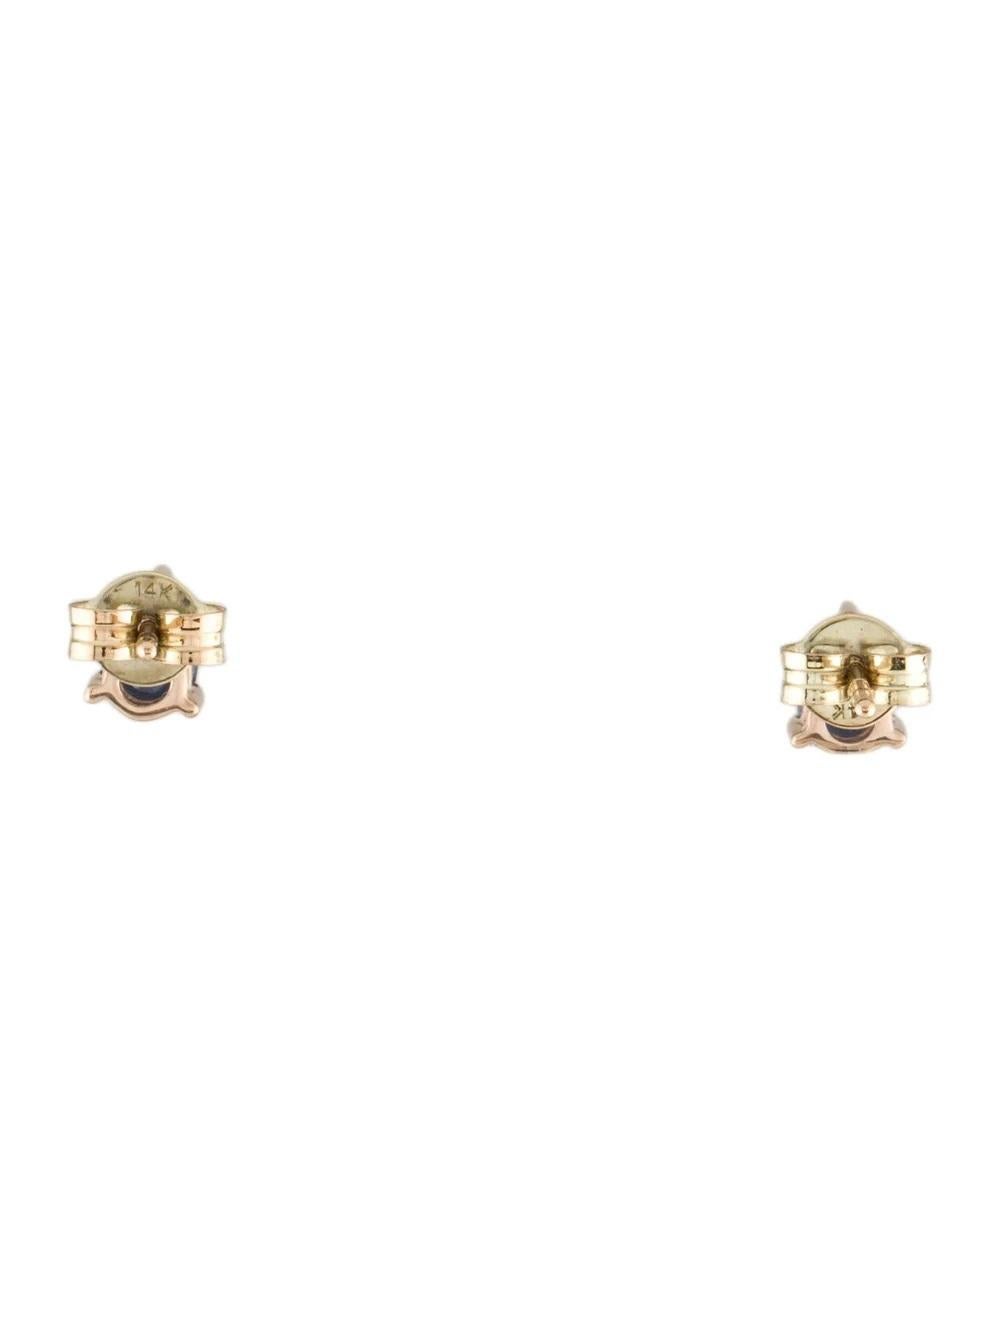 14K Sapphire Stud Earrings Blue Gemstone Yellow Gold - Timeless Jewelry In New Condition For Sale In Holtsville, NY